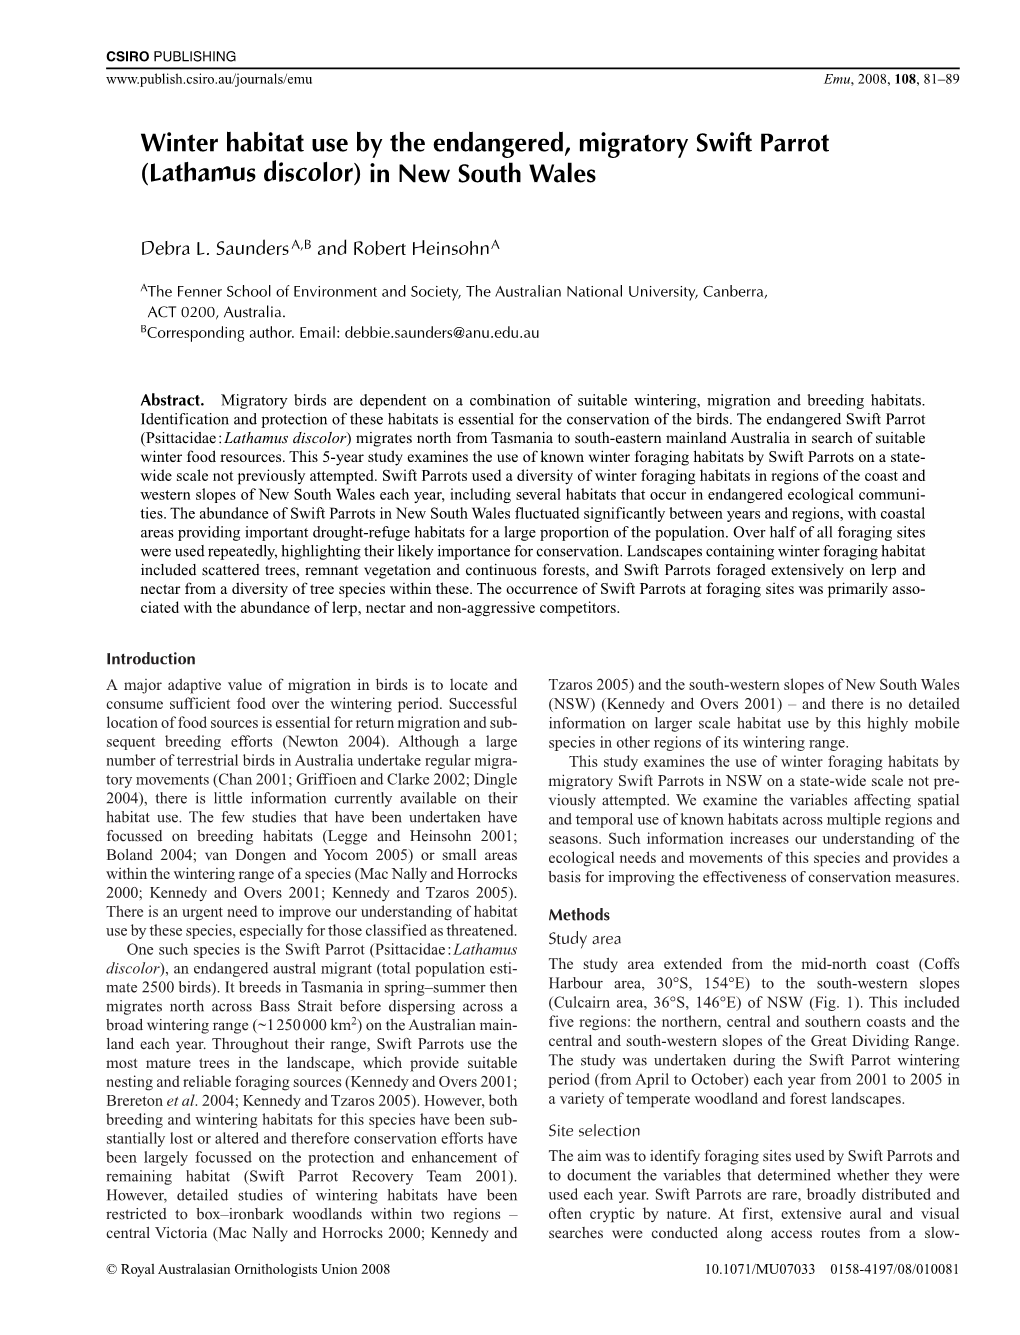 Winter Habitat Use by the Endangered, Migratory Swift Parrot (Lathamus Discolor) in New South Wales